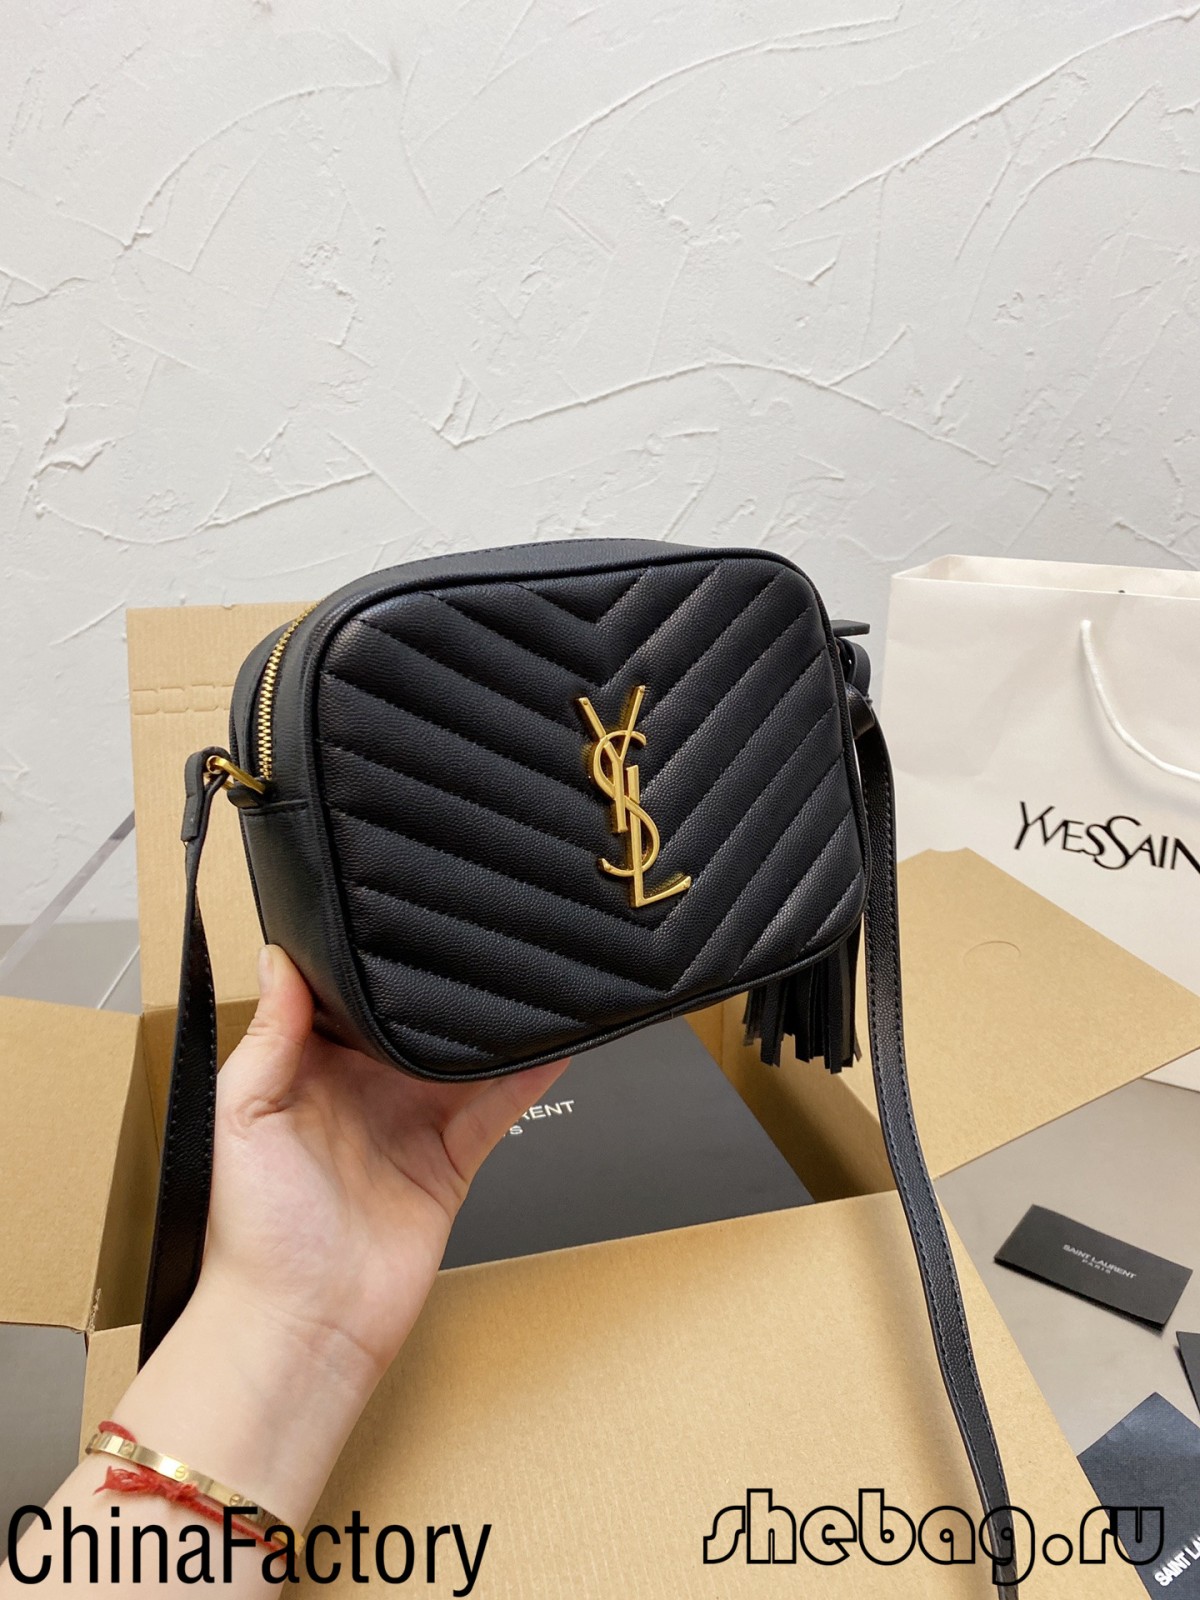 Designer bags for young girls – 8 YSL Replica bags worth buying (2022 latest)-Best Quality Fake designer Bag Review, Replica designer bag ru